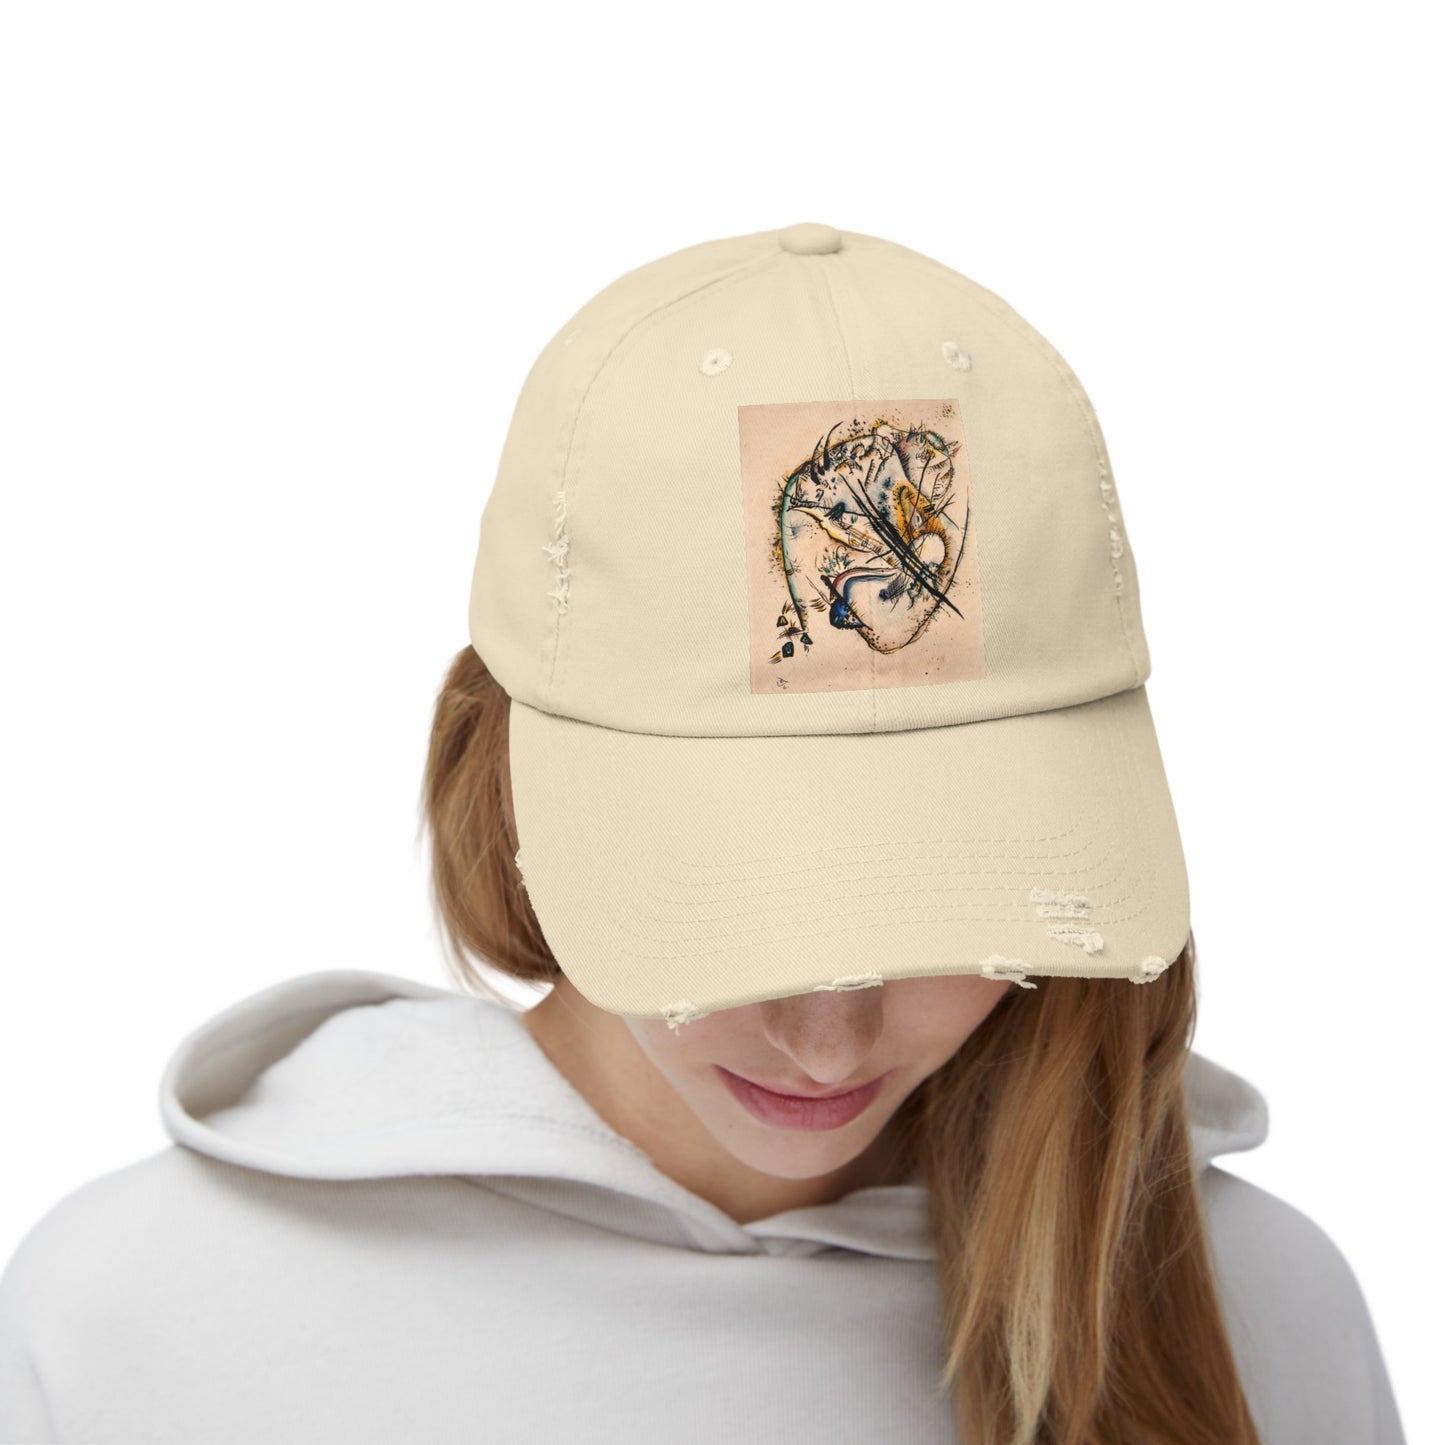 a woman wearing a hat with a picture of a dragon on it